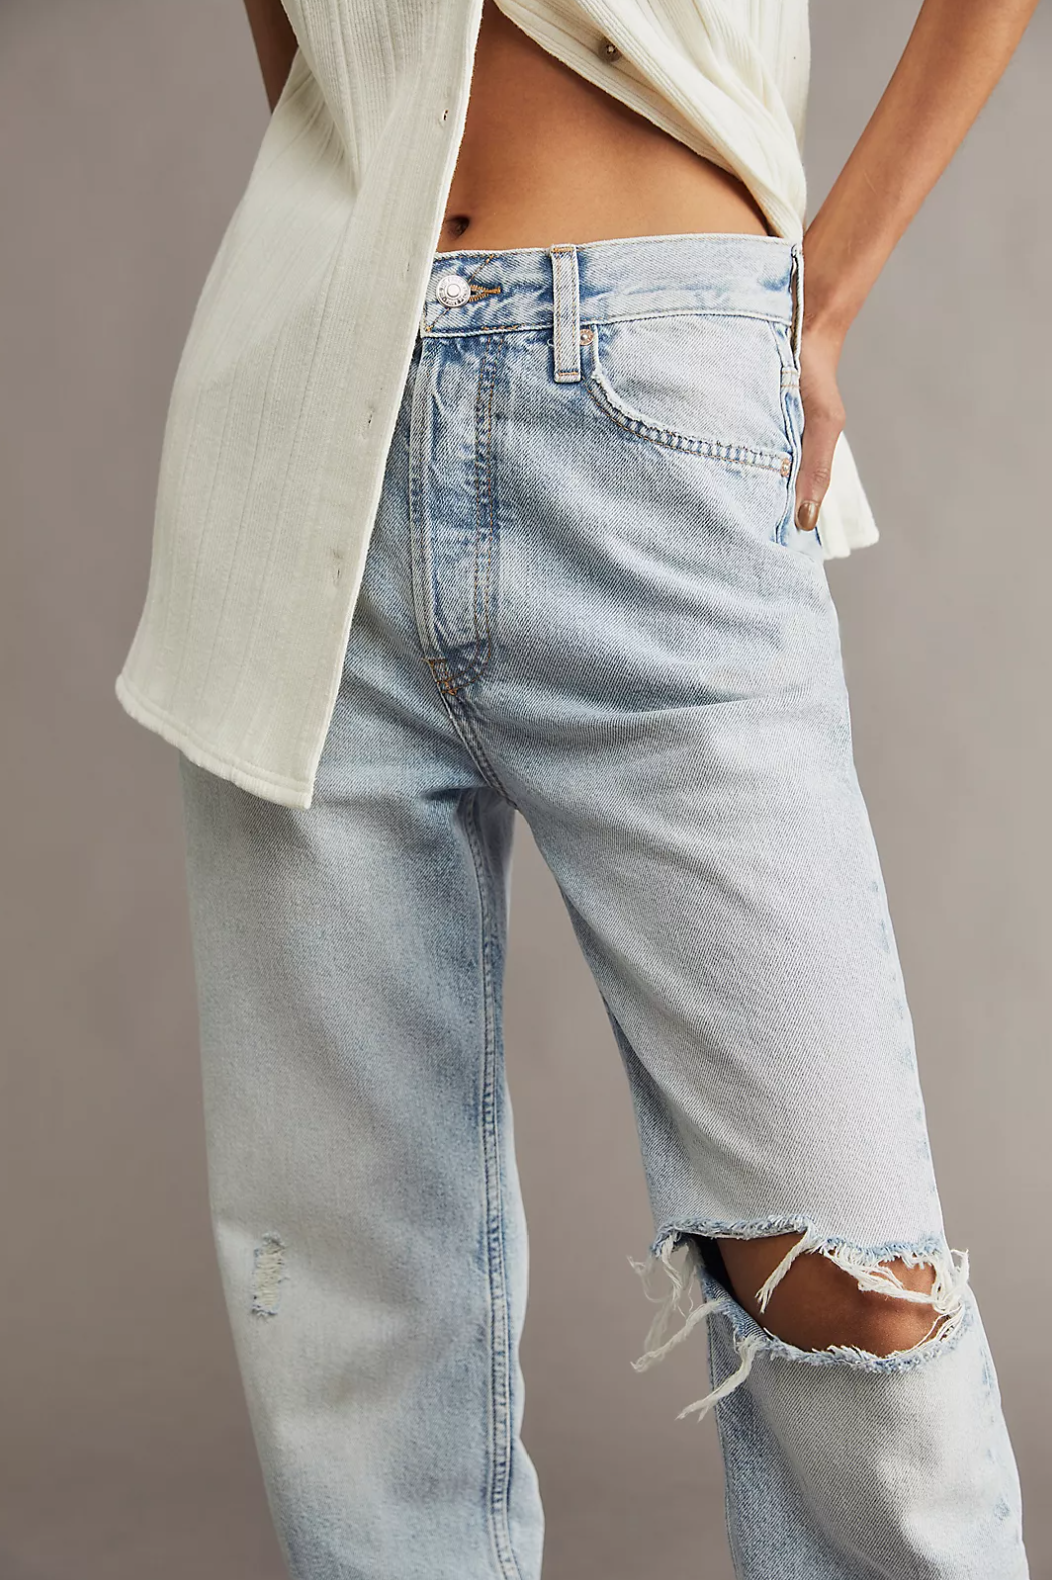 Product Name: Free People Women's Light Wash High Rise The Lasso Jeans